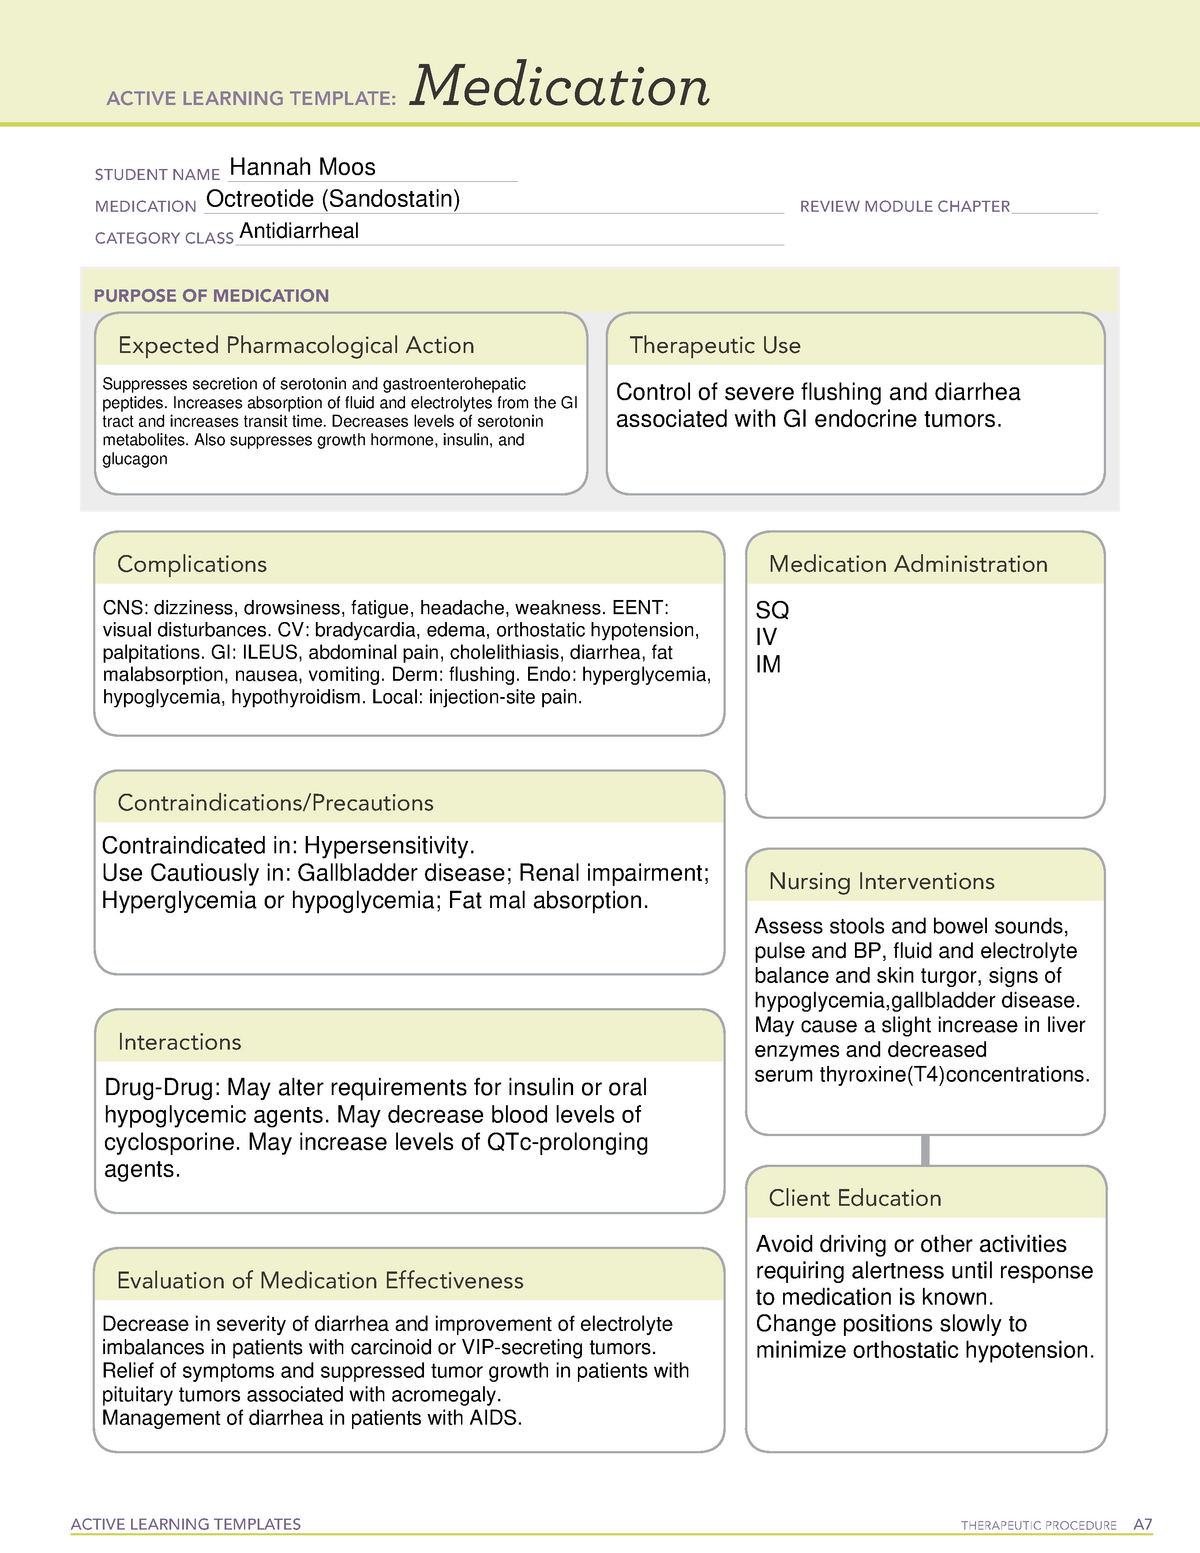 ati-med-card-octreotide-hm-active-learning-templates-therapeutic-procedure-a-medication